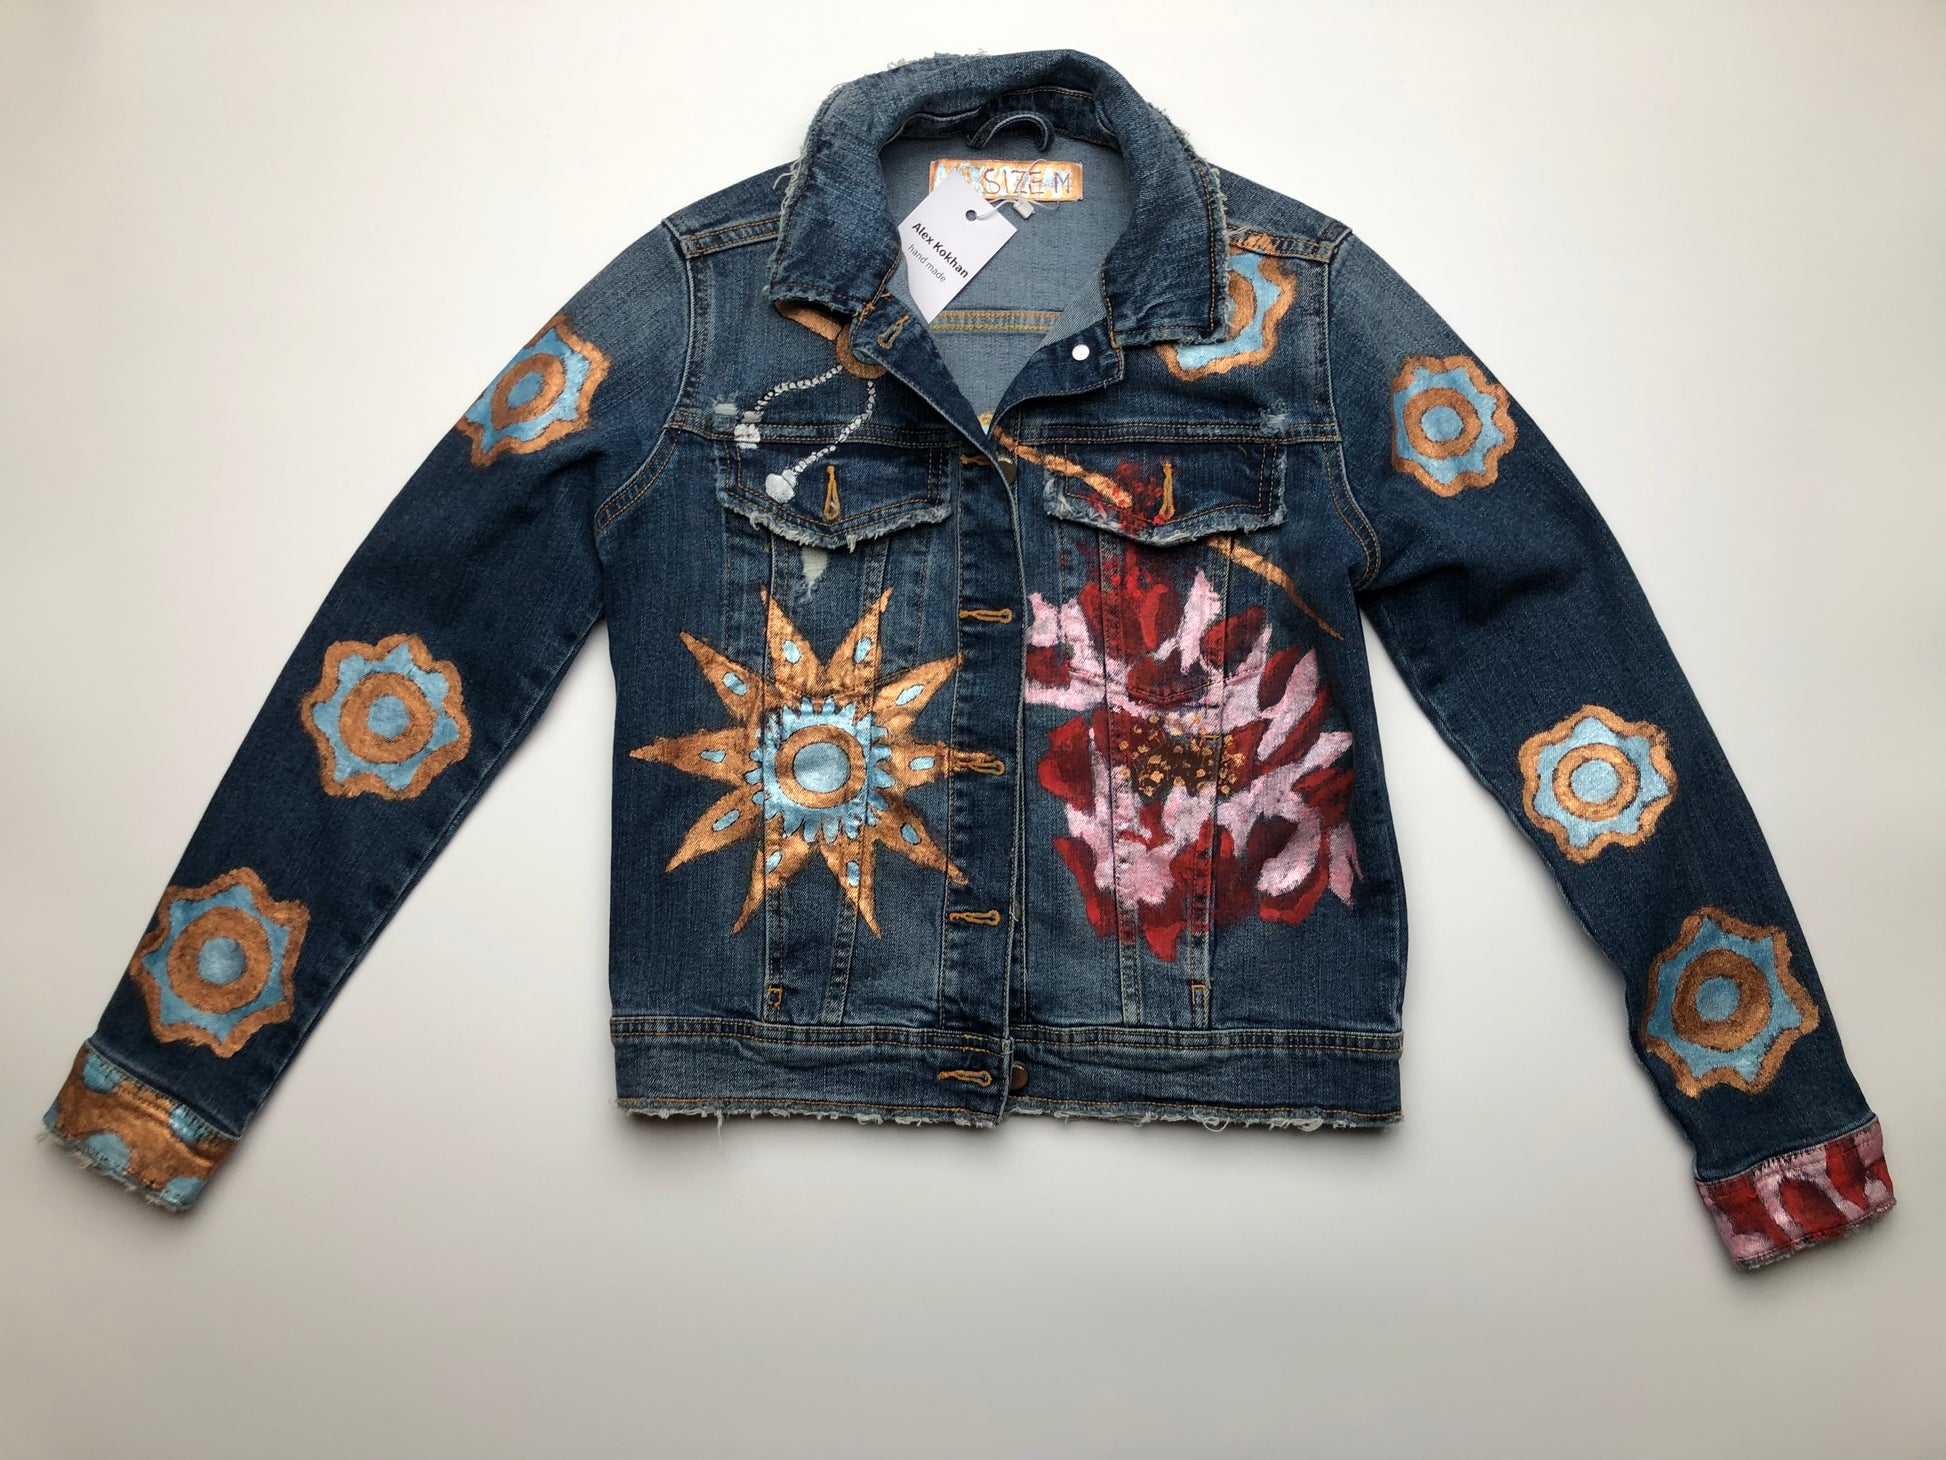 Gold and turquoise patterns on a women's denim jacket